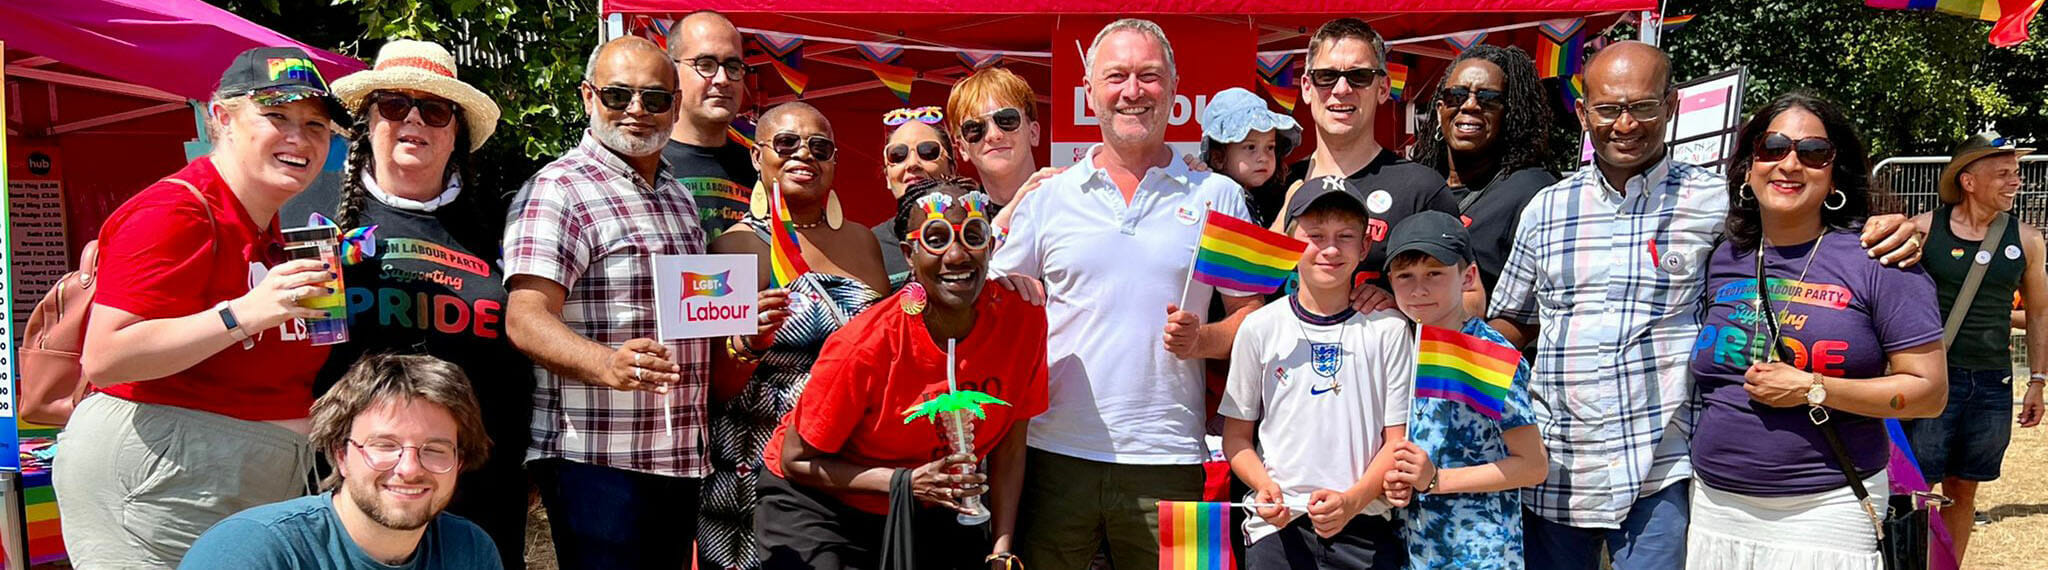 Labour At Pridefest: Standing By The LGBTQI+ Community In Croydon